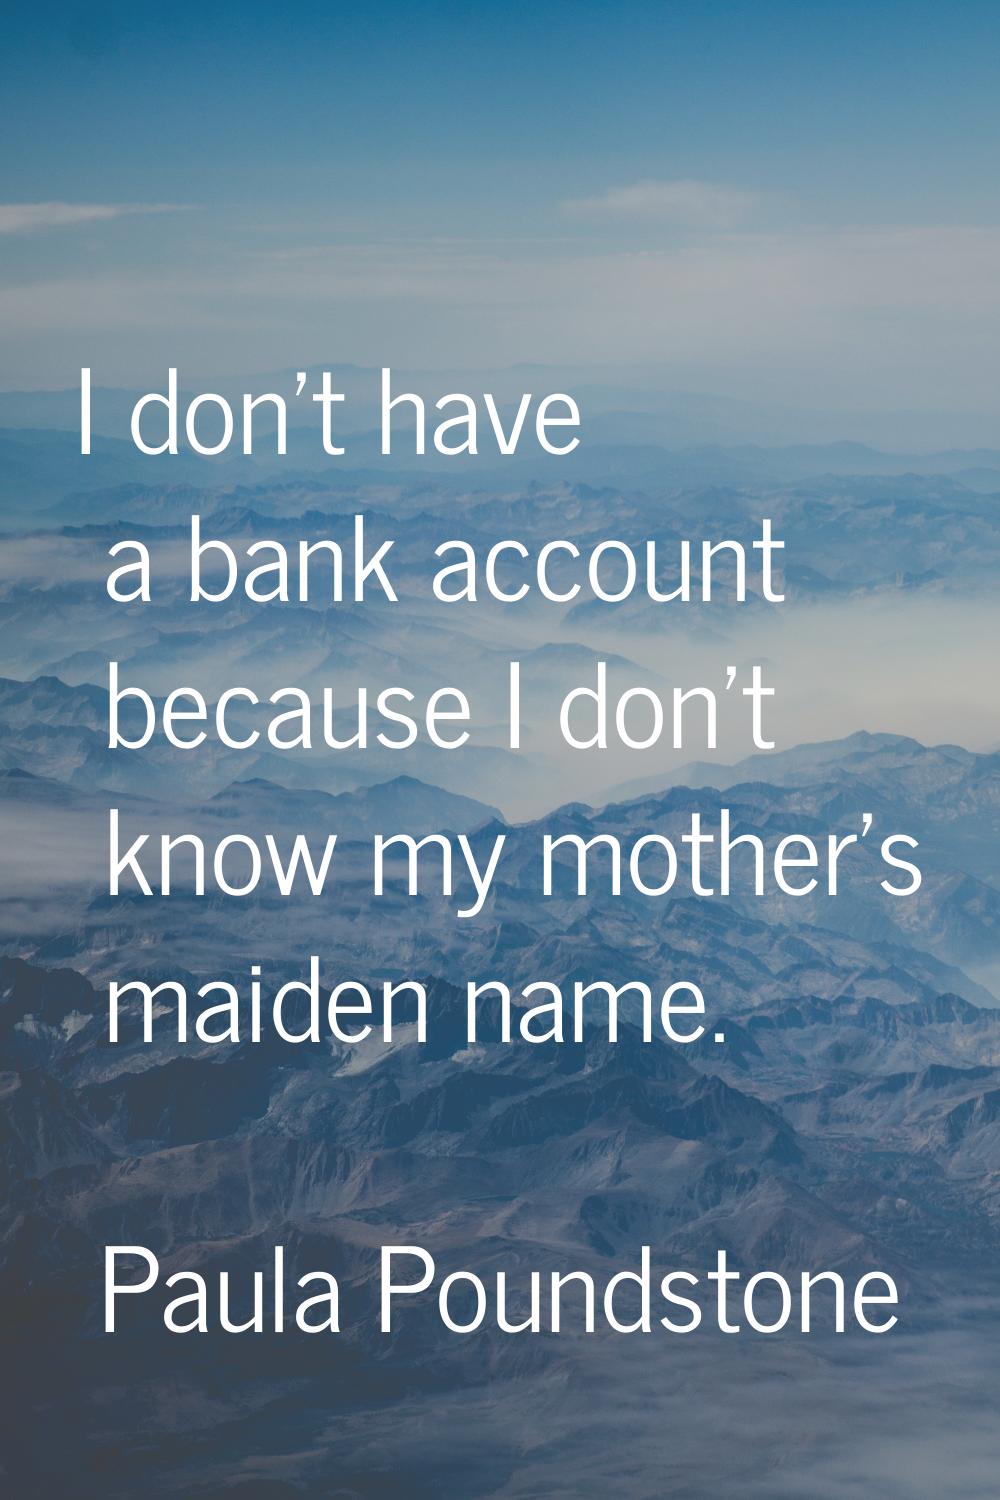 I don't have a bank account because I don't know my mother's maiden name.